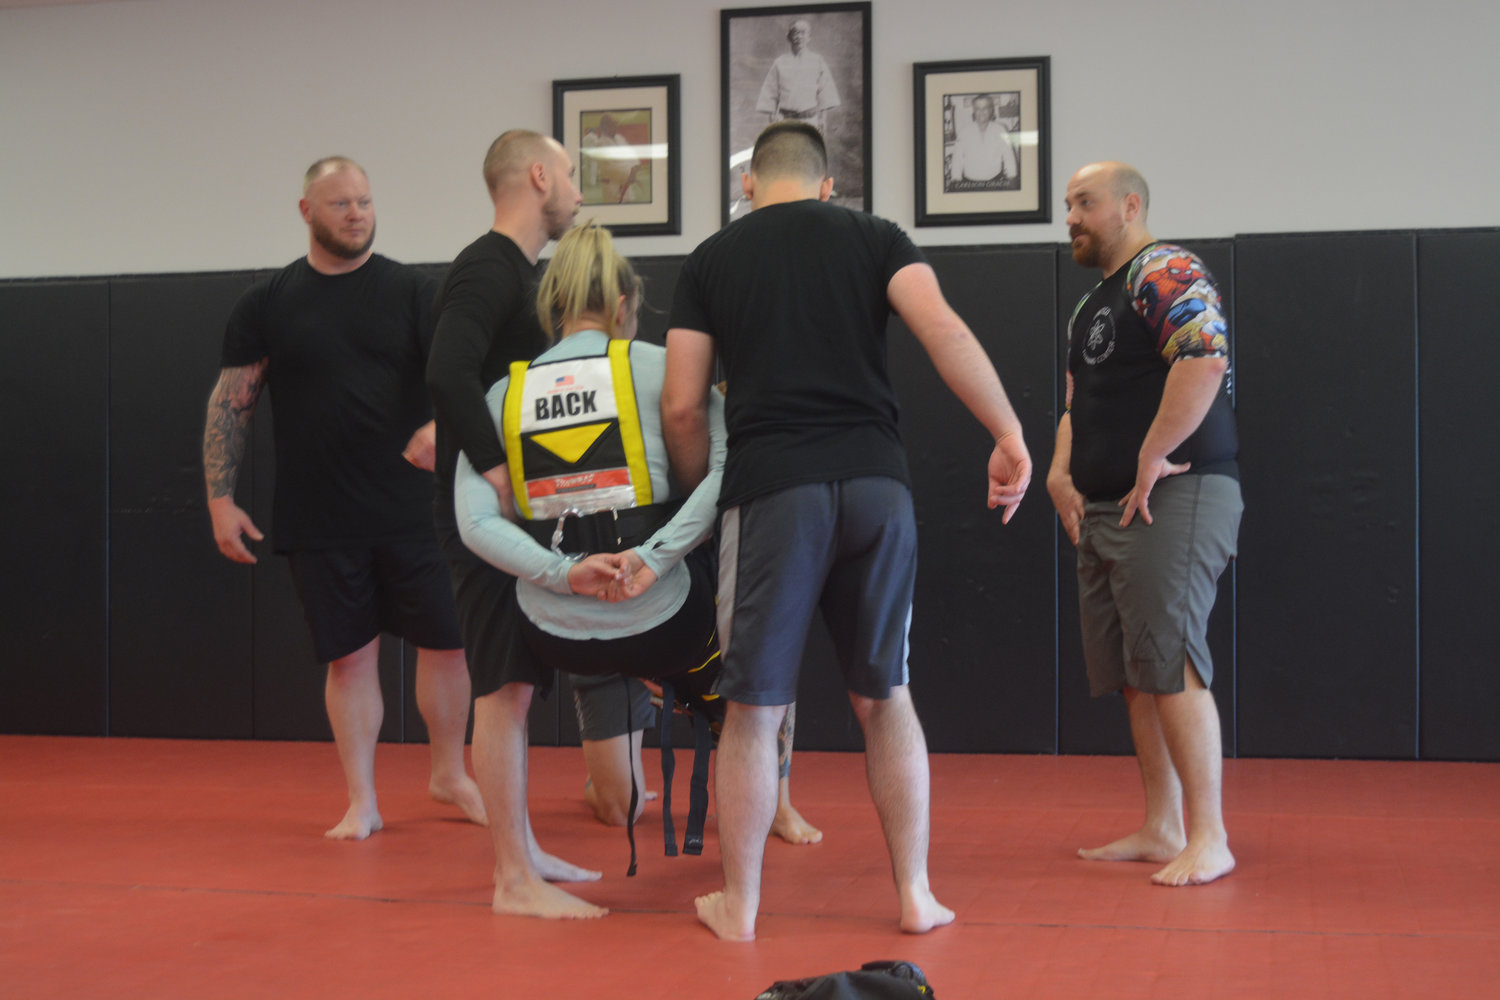 Members of the Yelm Police Department demonstrate a technique used to detain people during a training session at Harai Dojo.